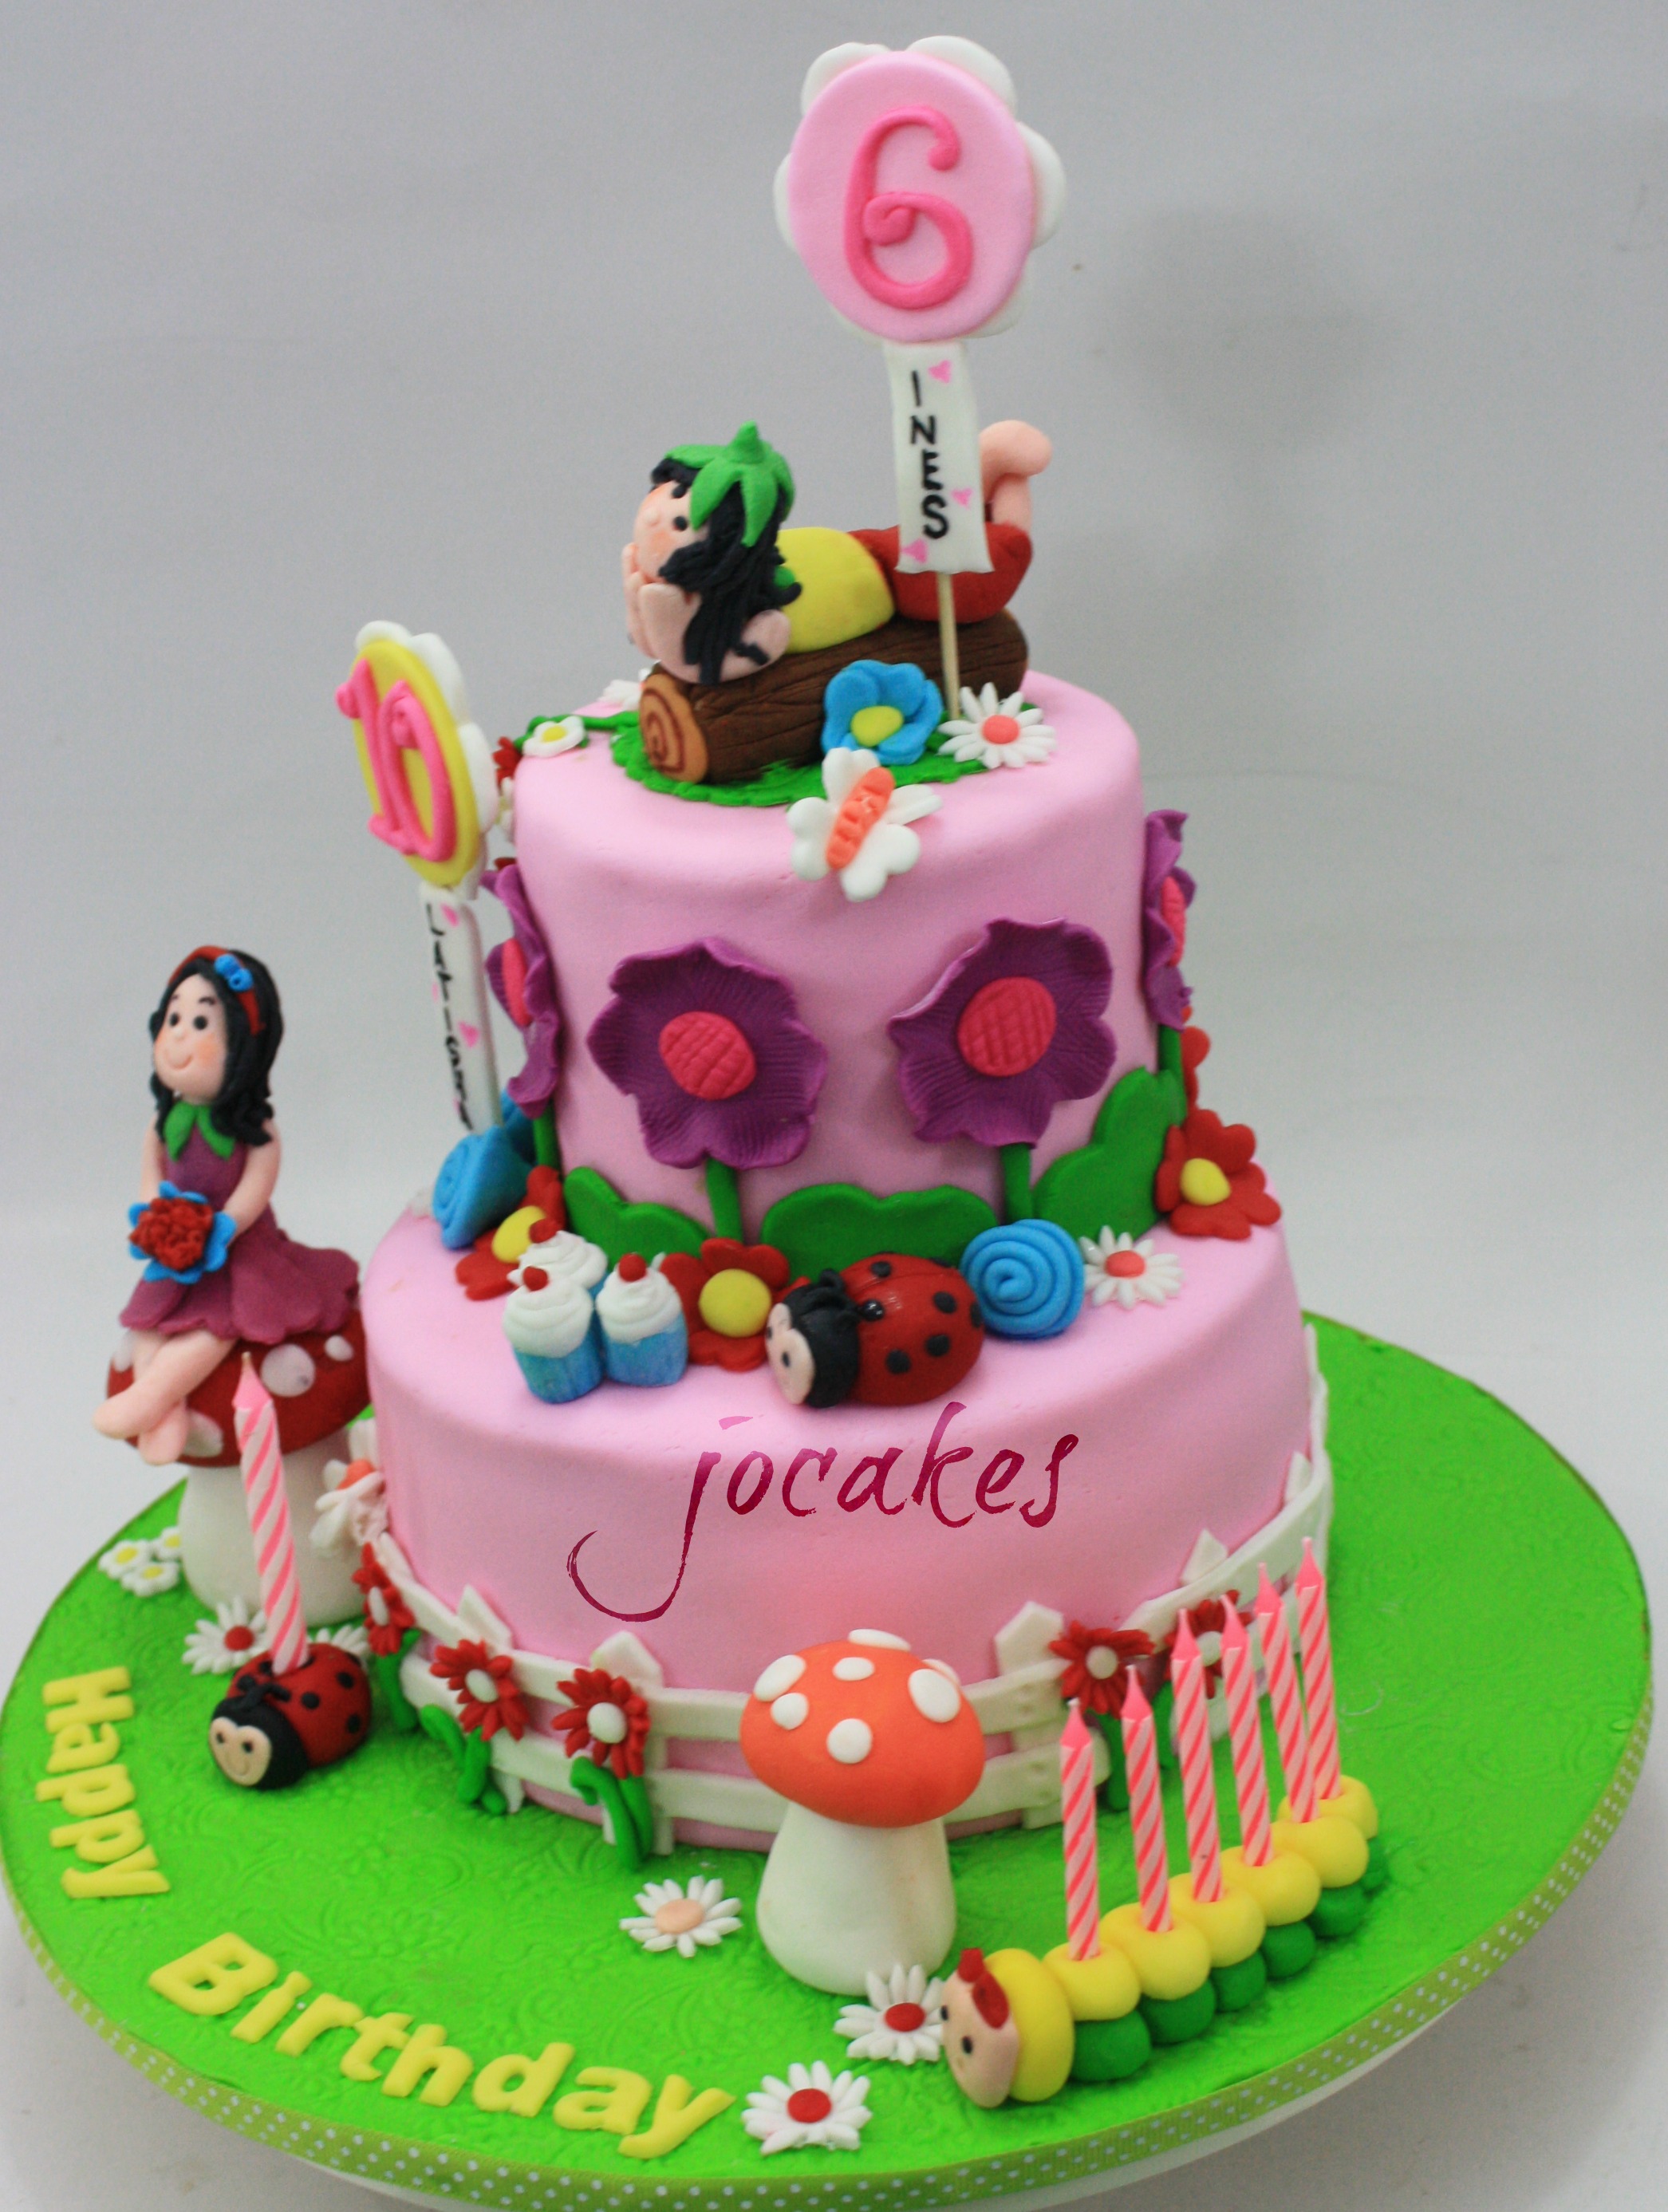 Birthday cake for a 6 year old girl who loves pink and ...